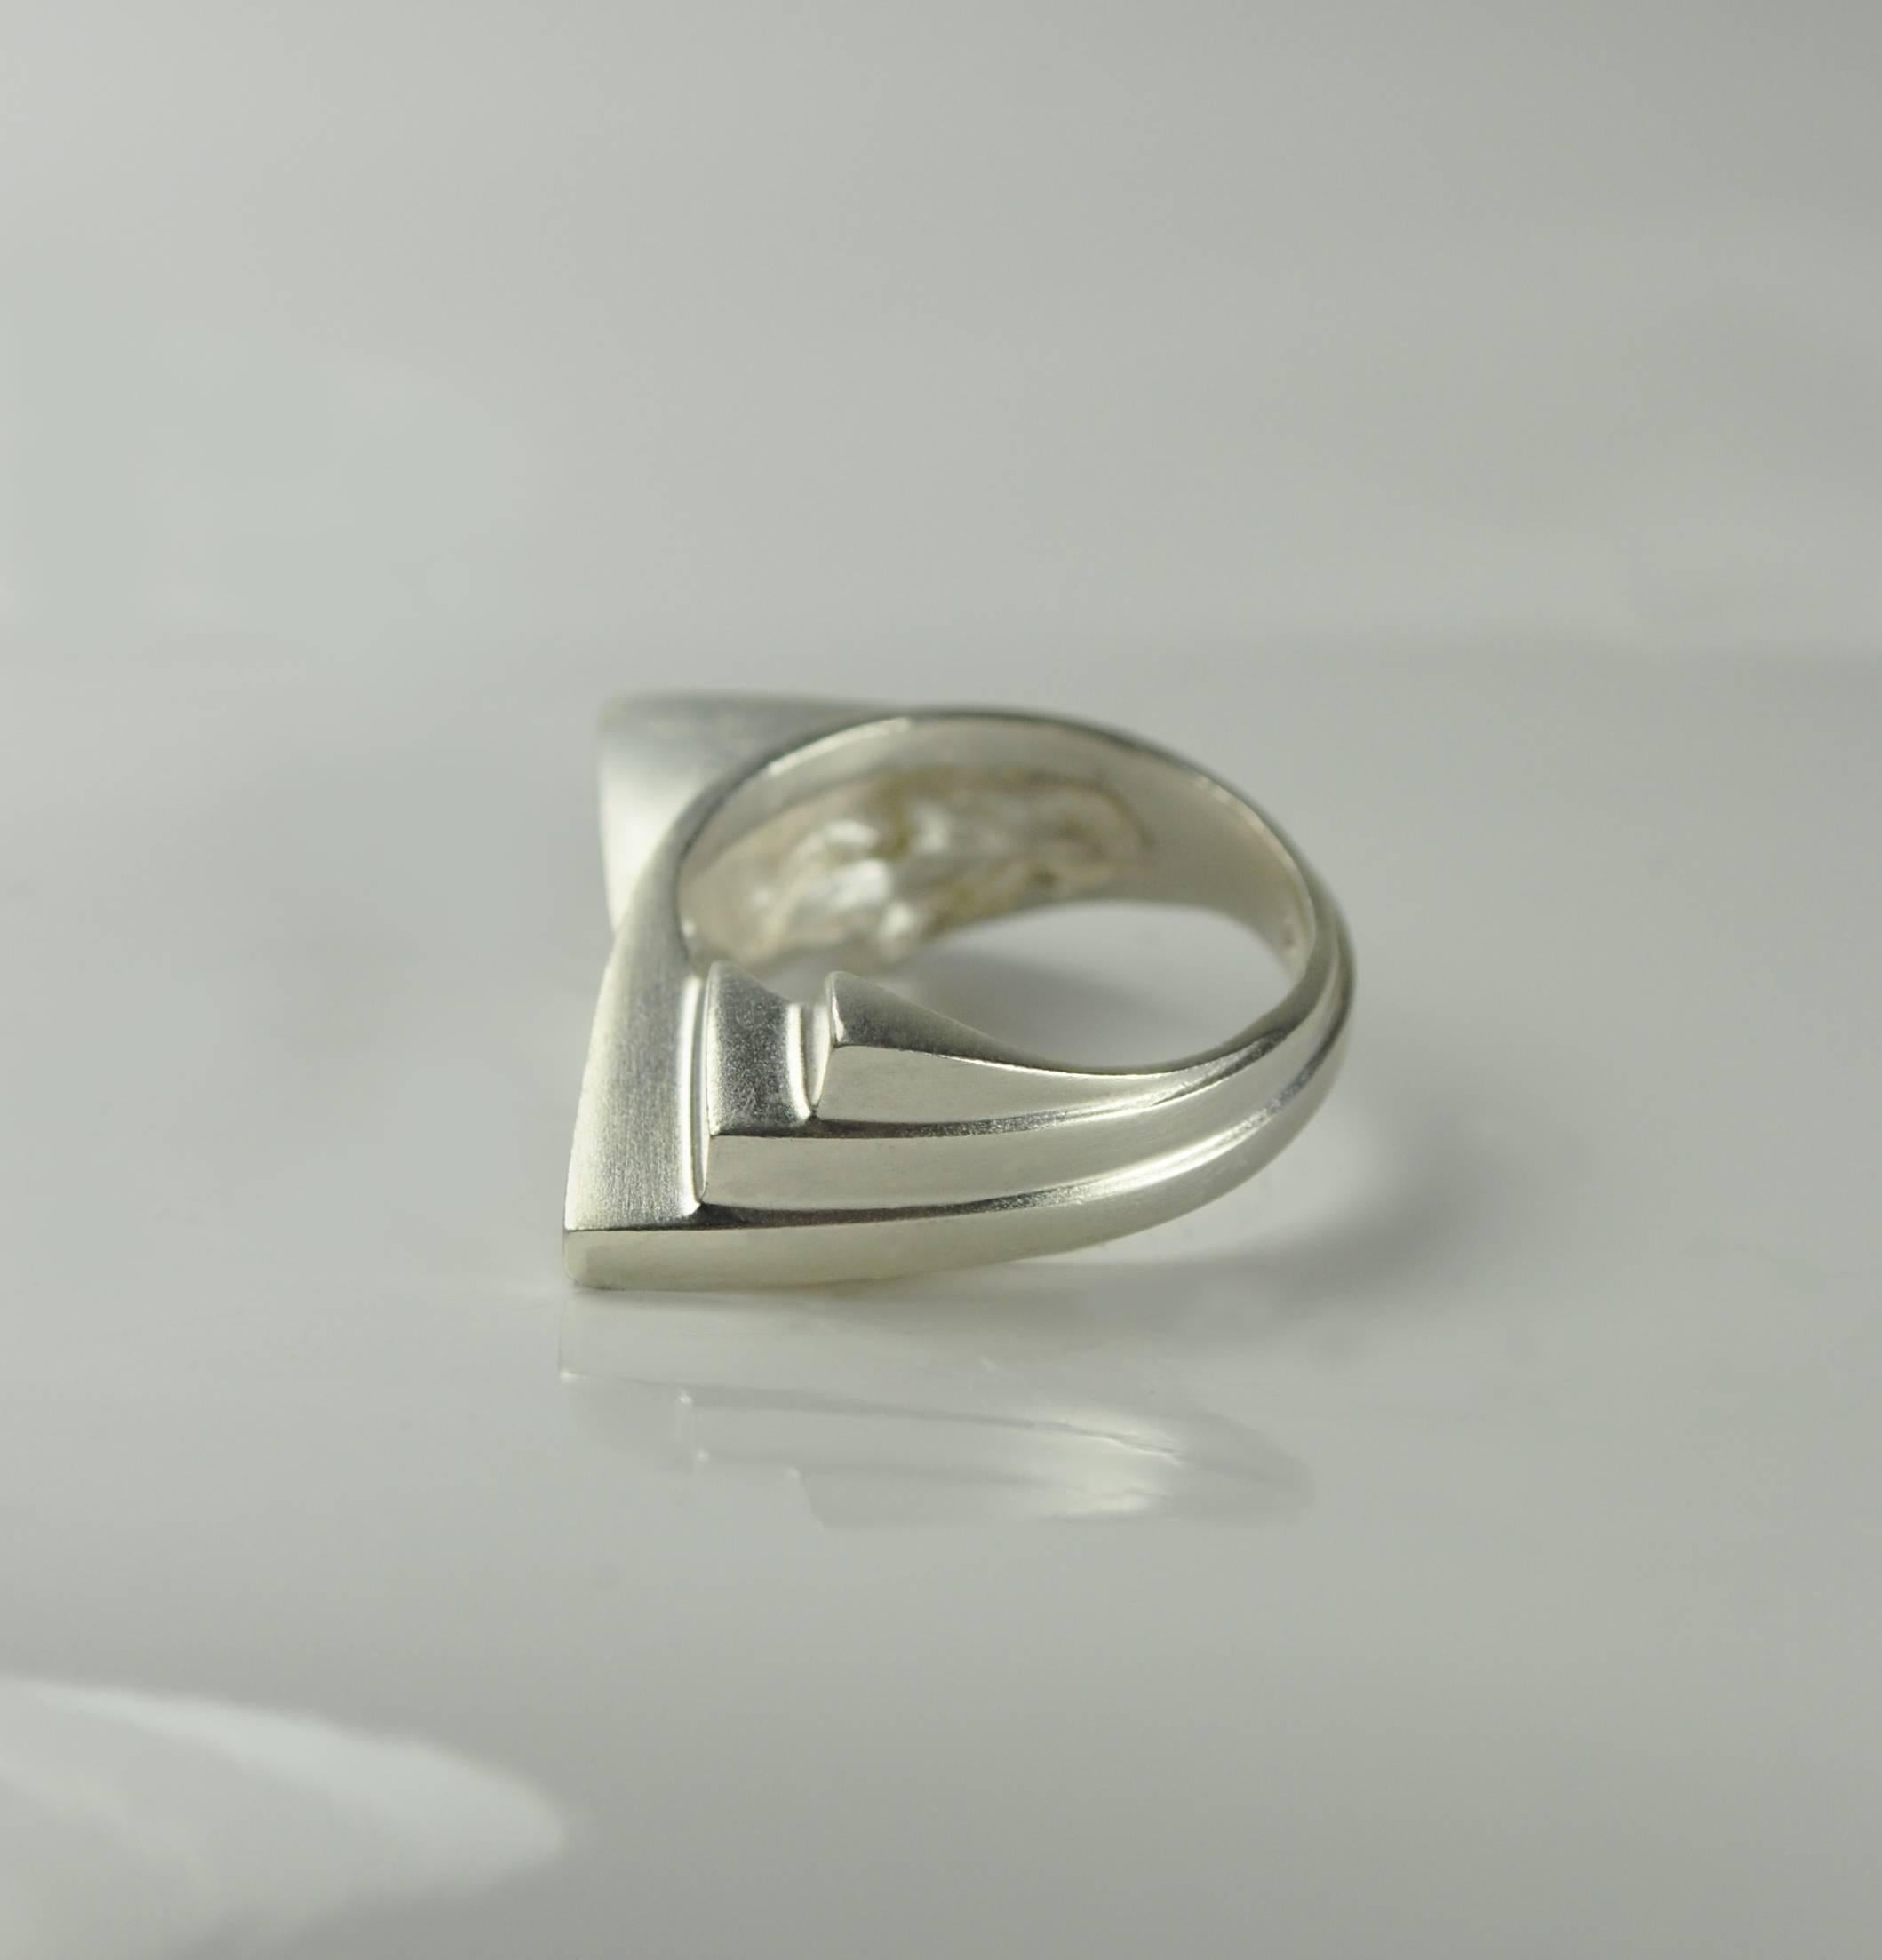 The beautiful modern two sided style fan ring. Solid sterling silver, the smooth and angular steps are a signature style creating elegance and edge for the subtle or statement seeking individual.

Designed and created in Dublin, Ireland. Handling